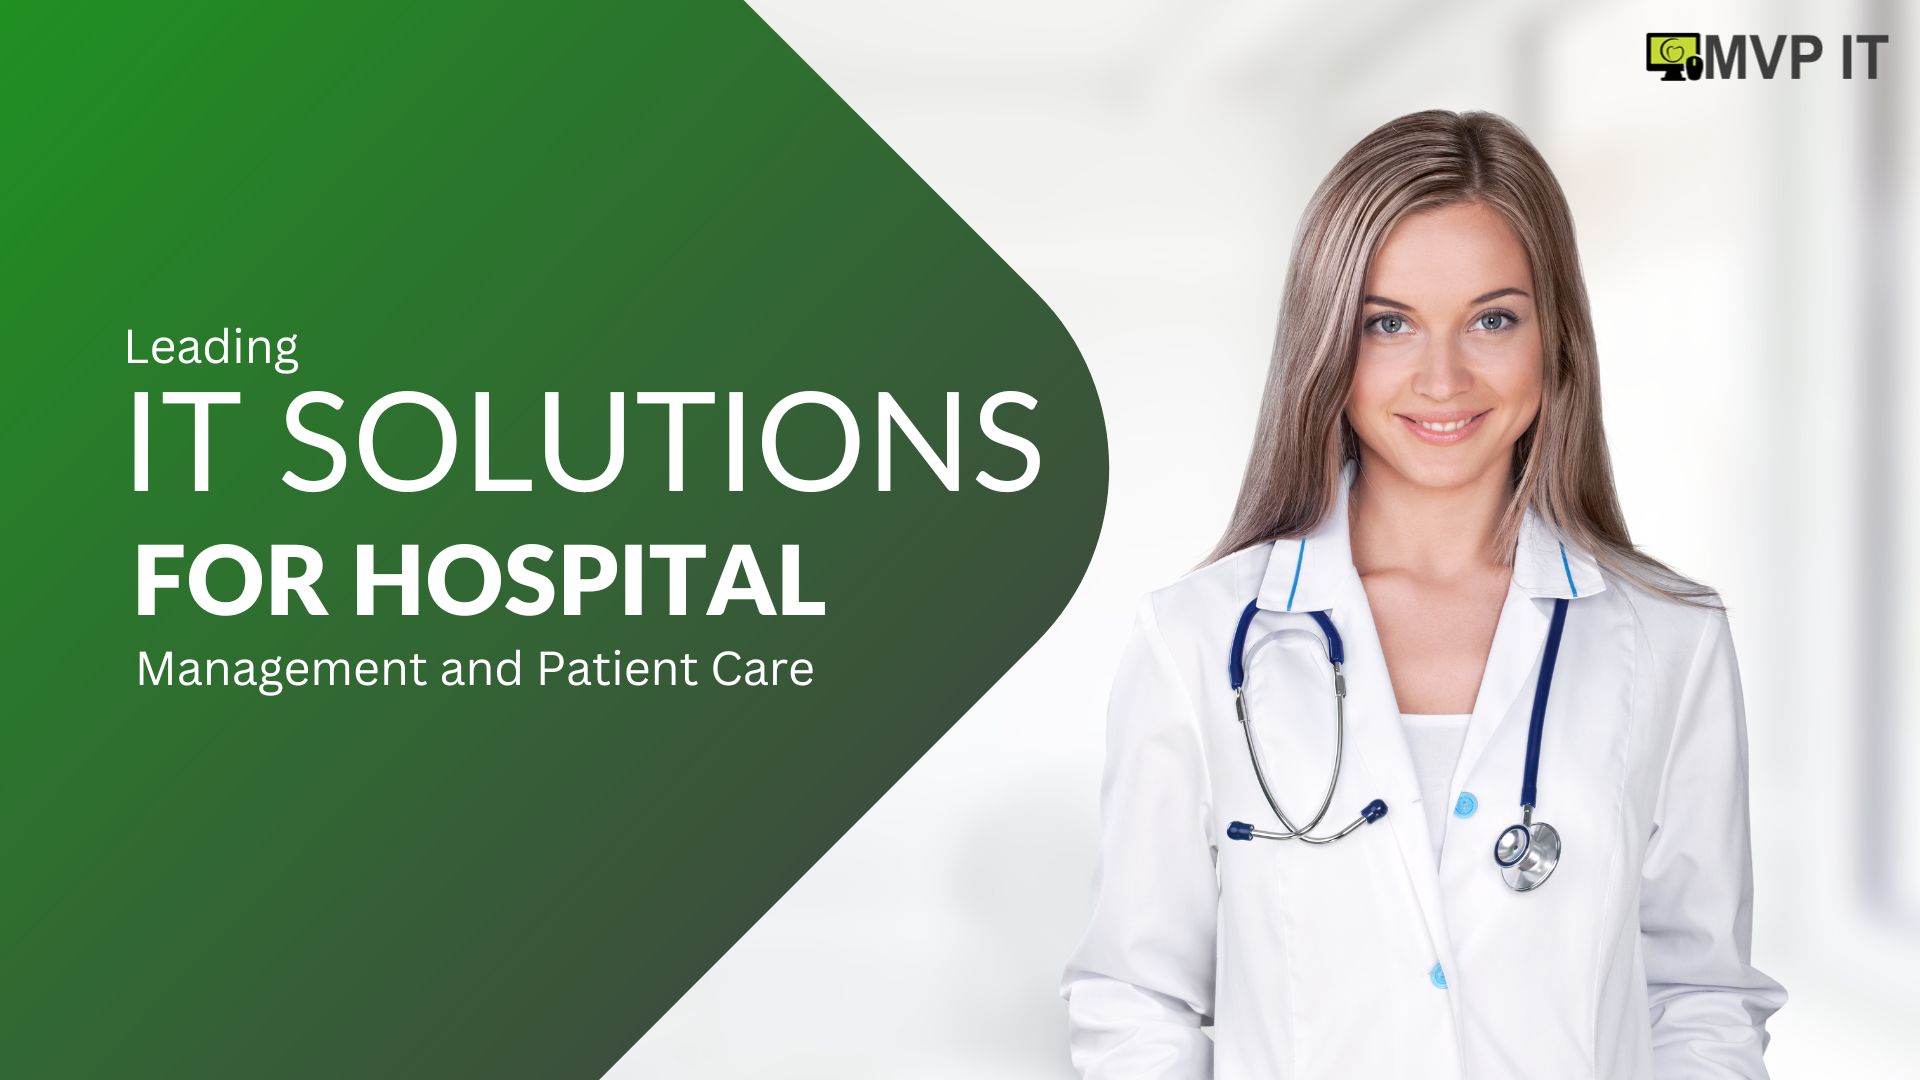 IT Solutions for Hospital